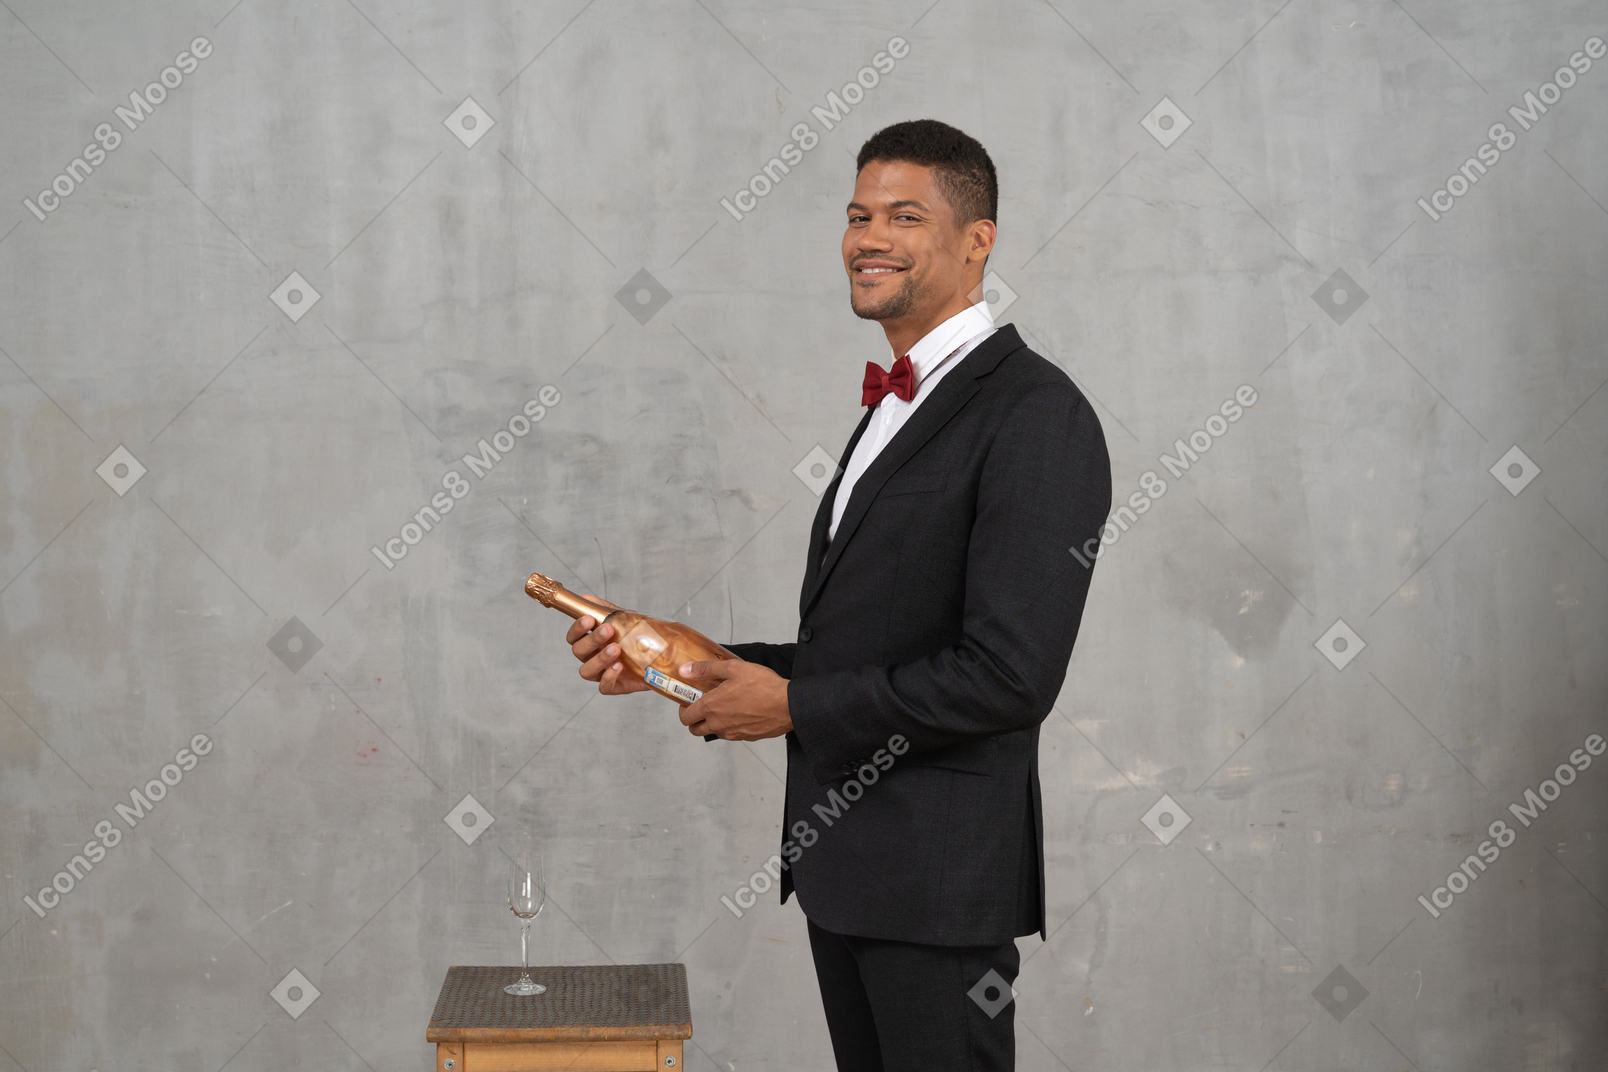 Joyful man standing and holding a bottle of champagne